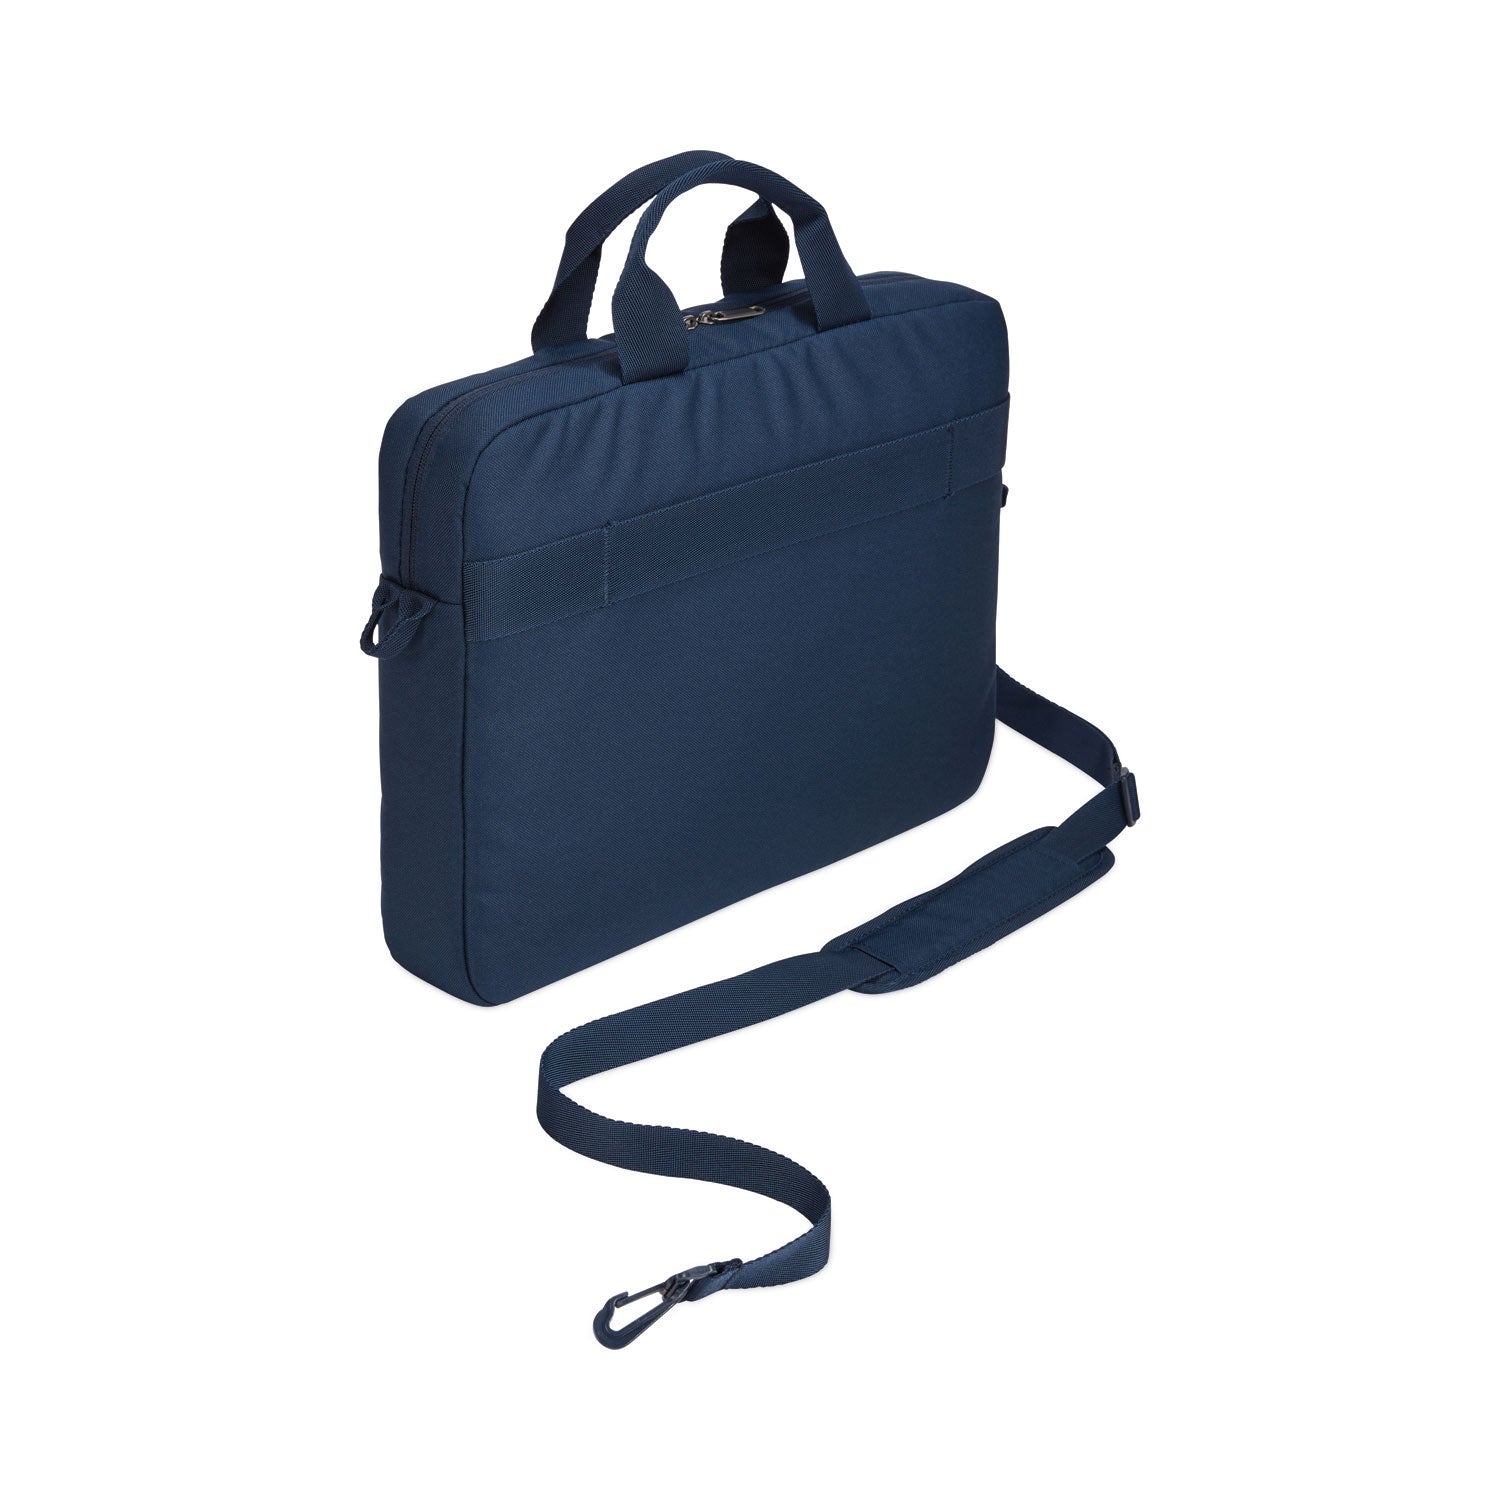 advantage-laptop-attache-fits-devices-up-to-14-polyester-146-x-28-x-13-dark-blue_clg3203987 - 4